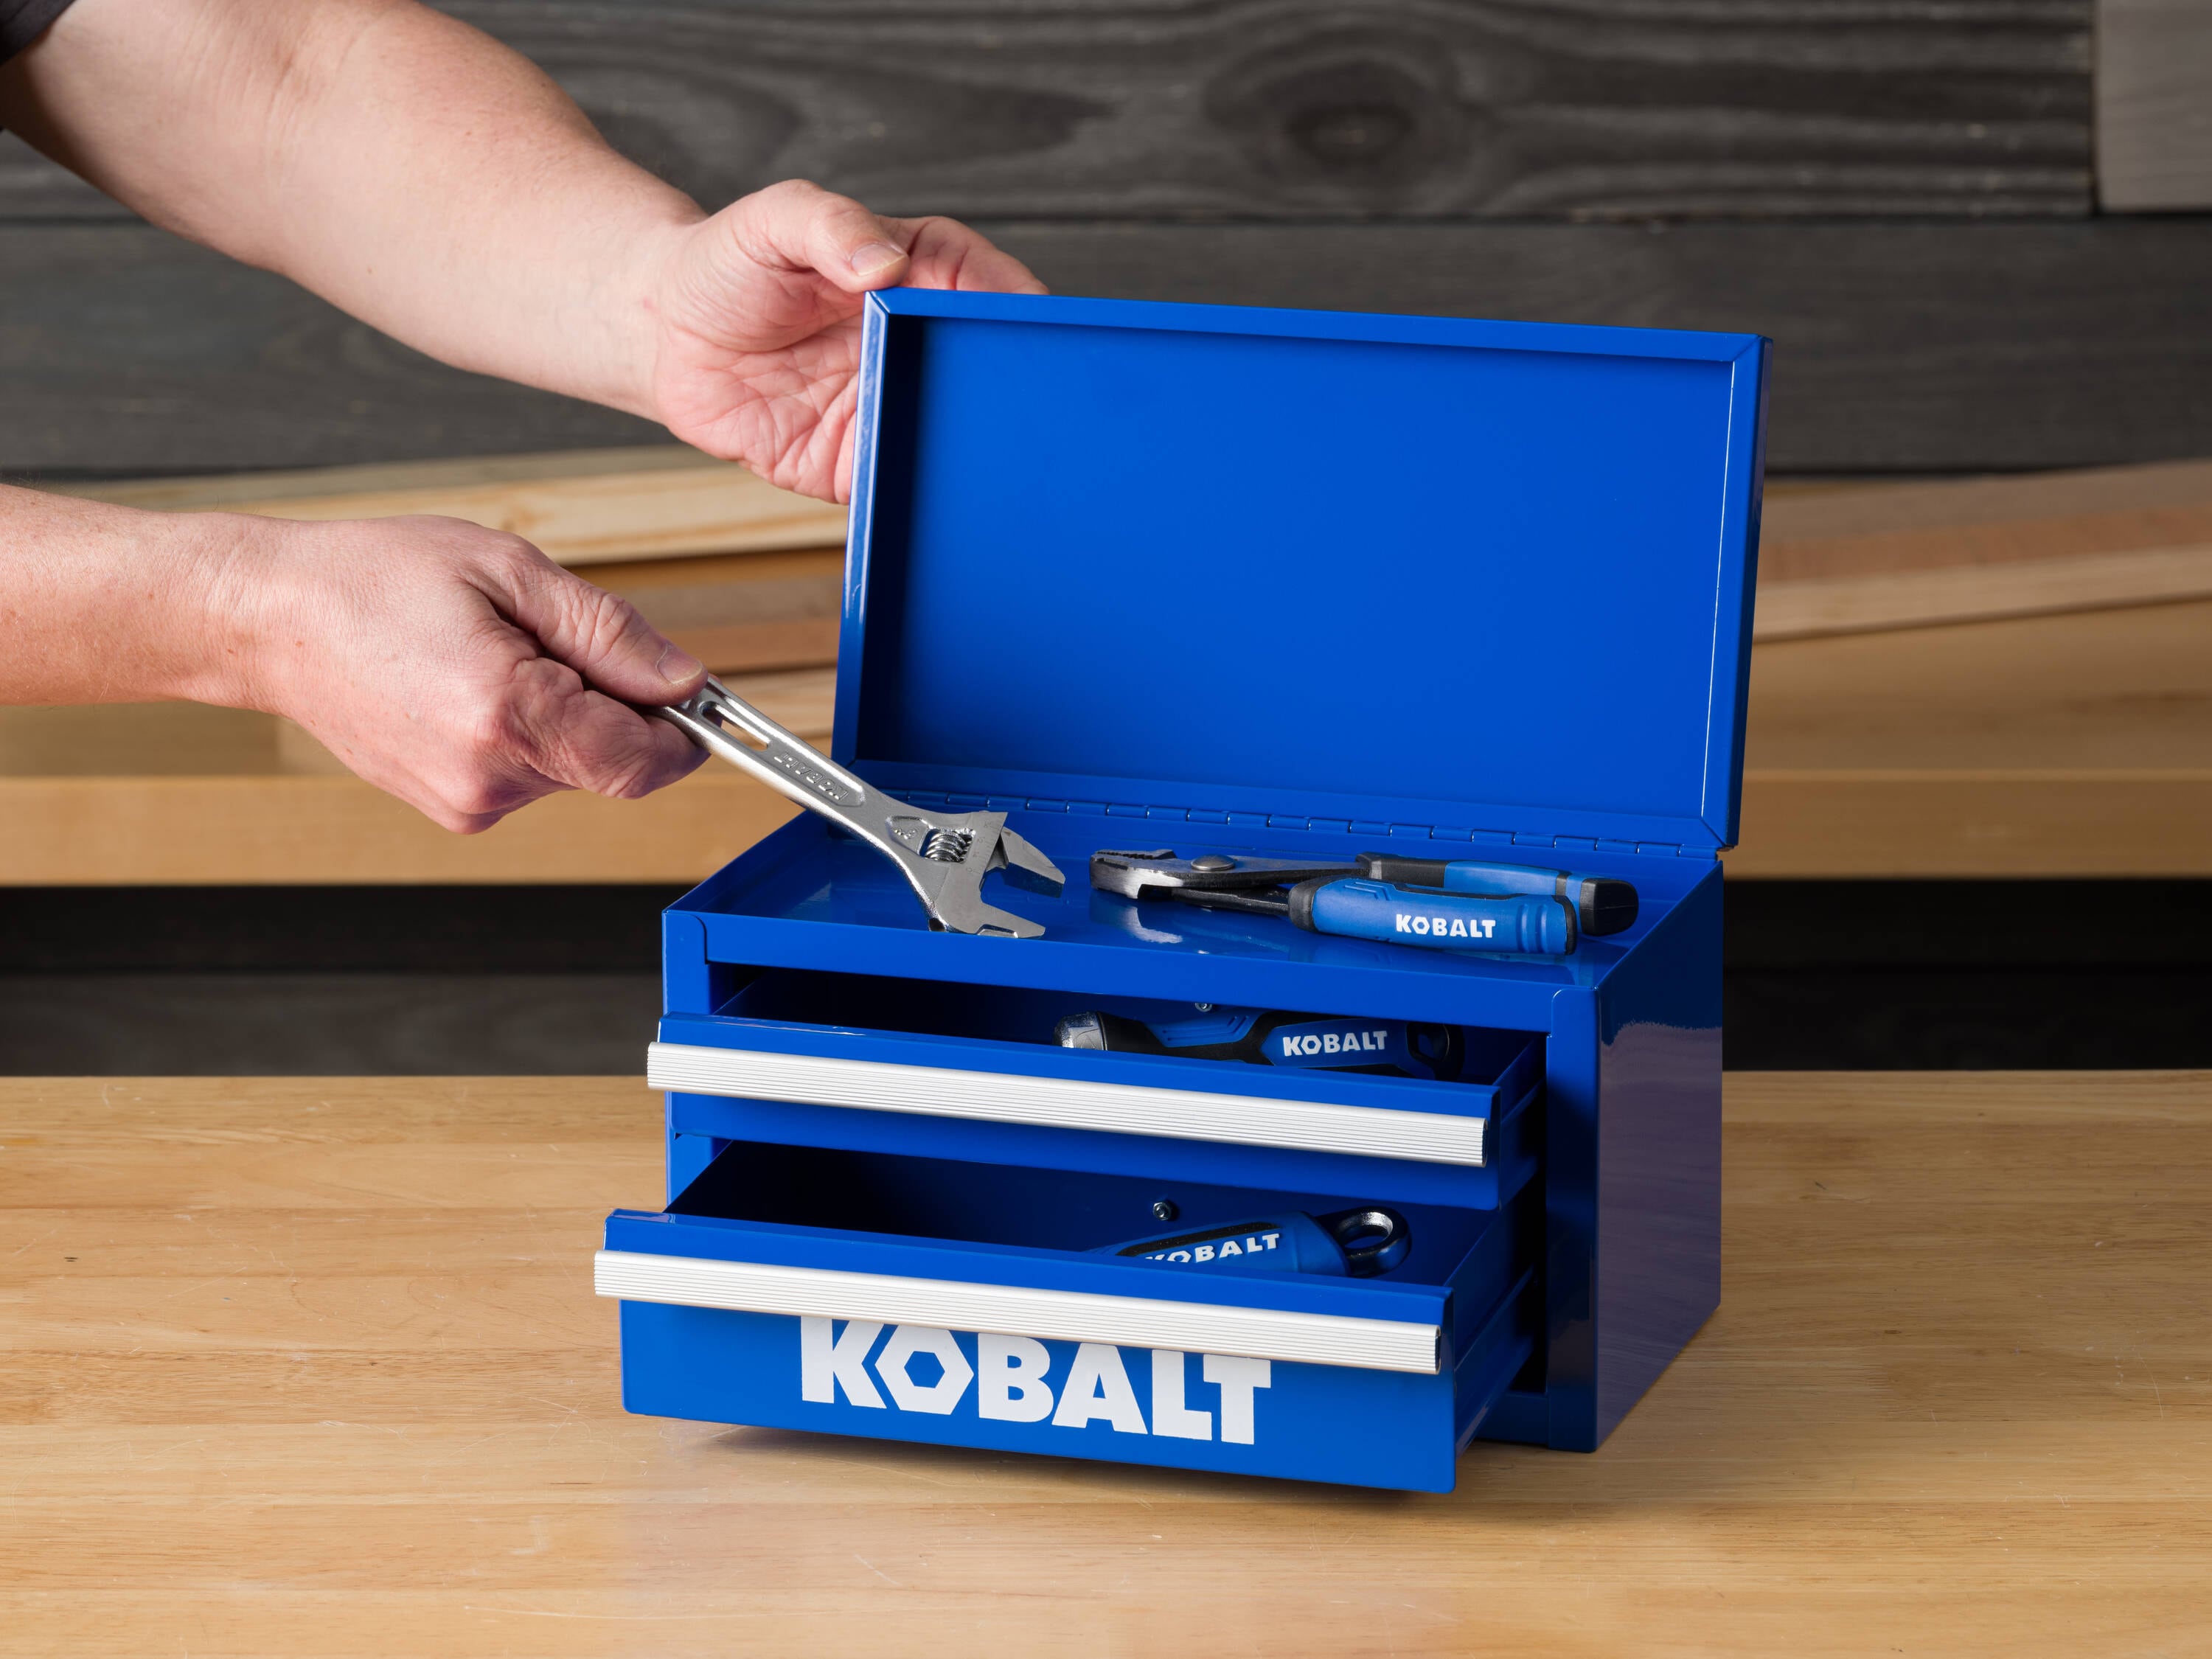 If you can get your hands on the Kobalt mini desktop toolbox, I highly  recommend it to organize all your notions! : r/quilting